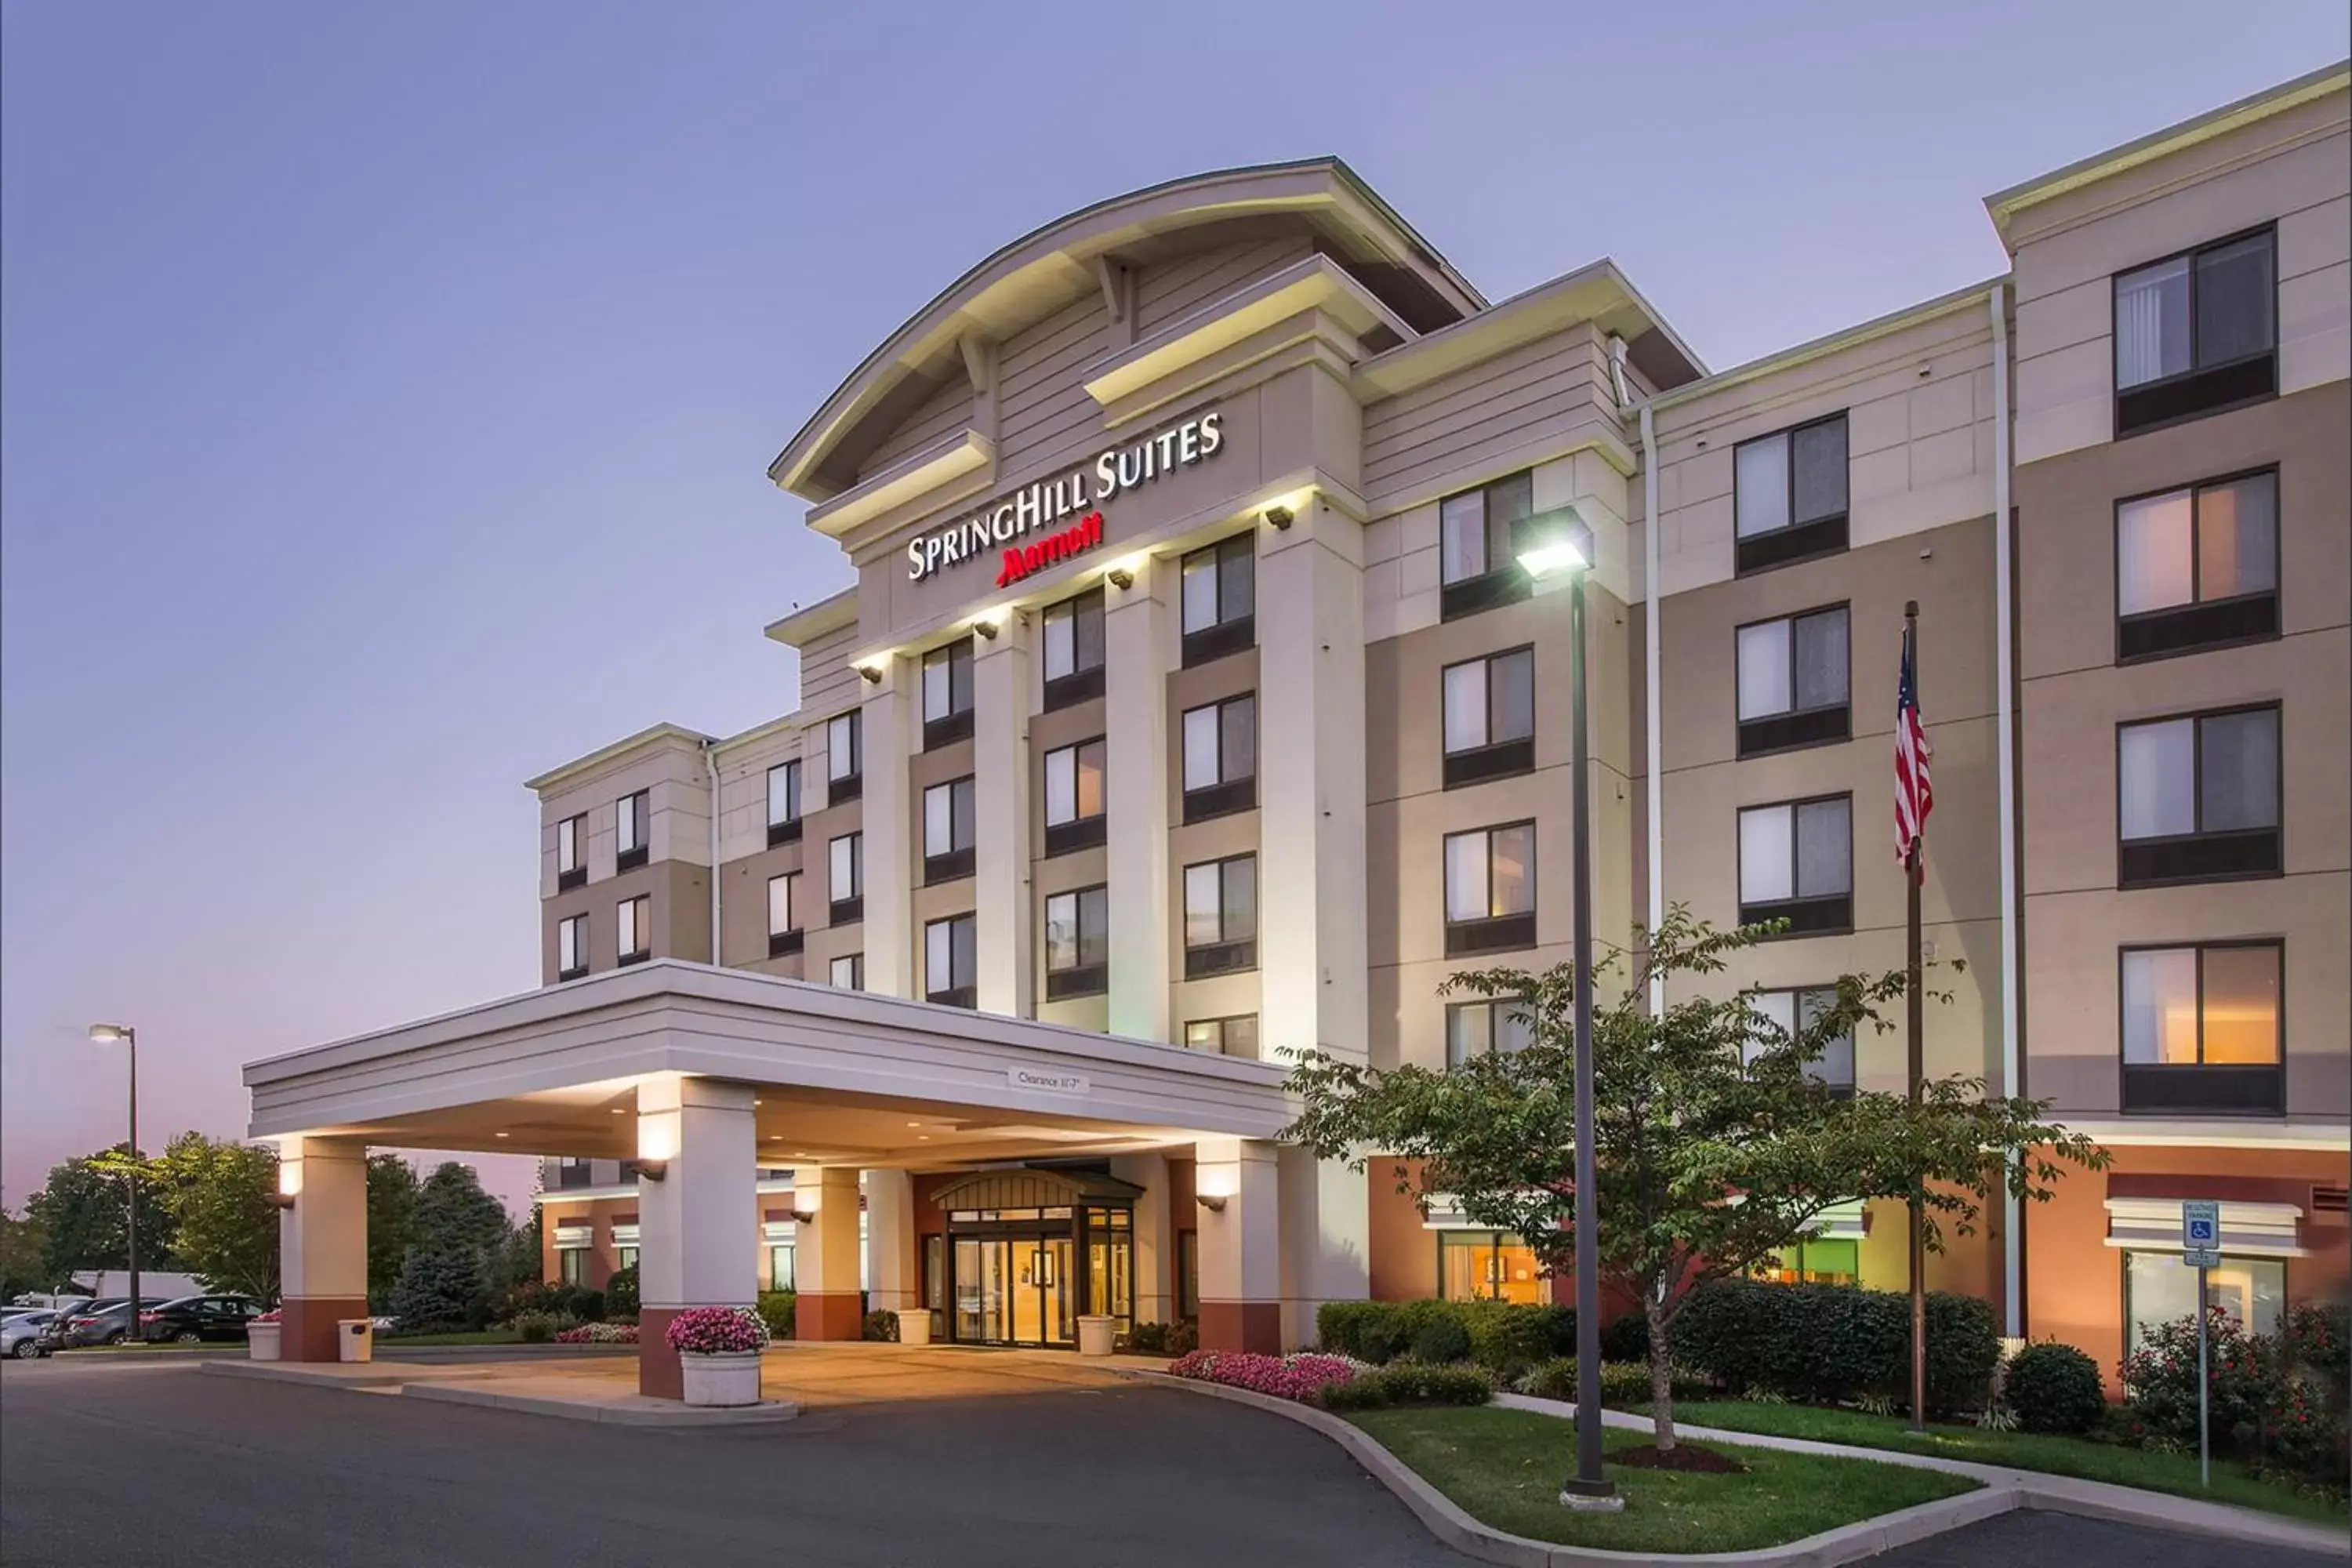 Property Building in SpringHill Suites Hagerstown